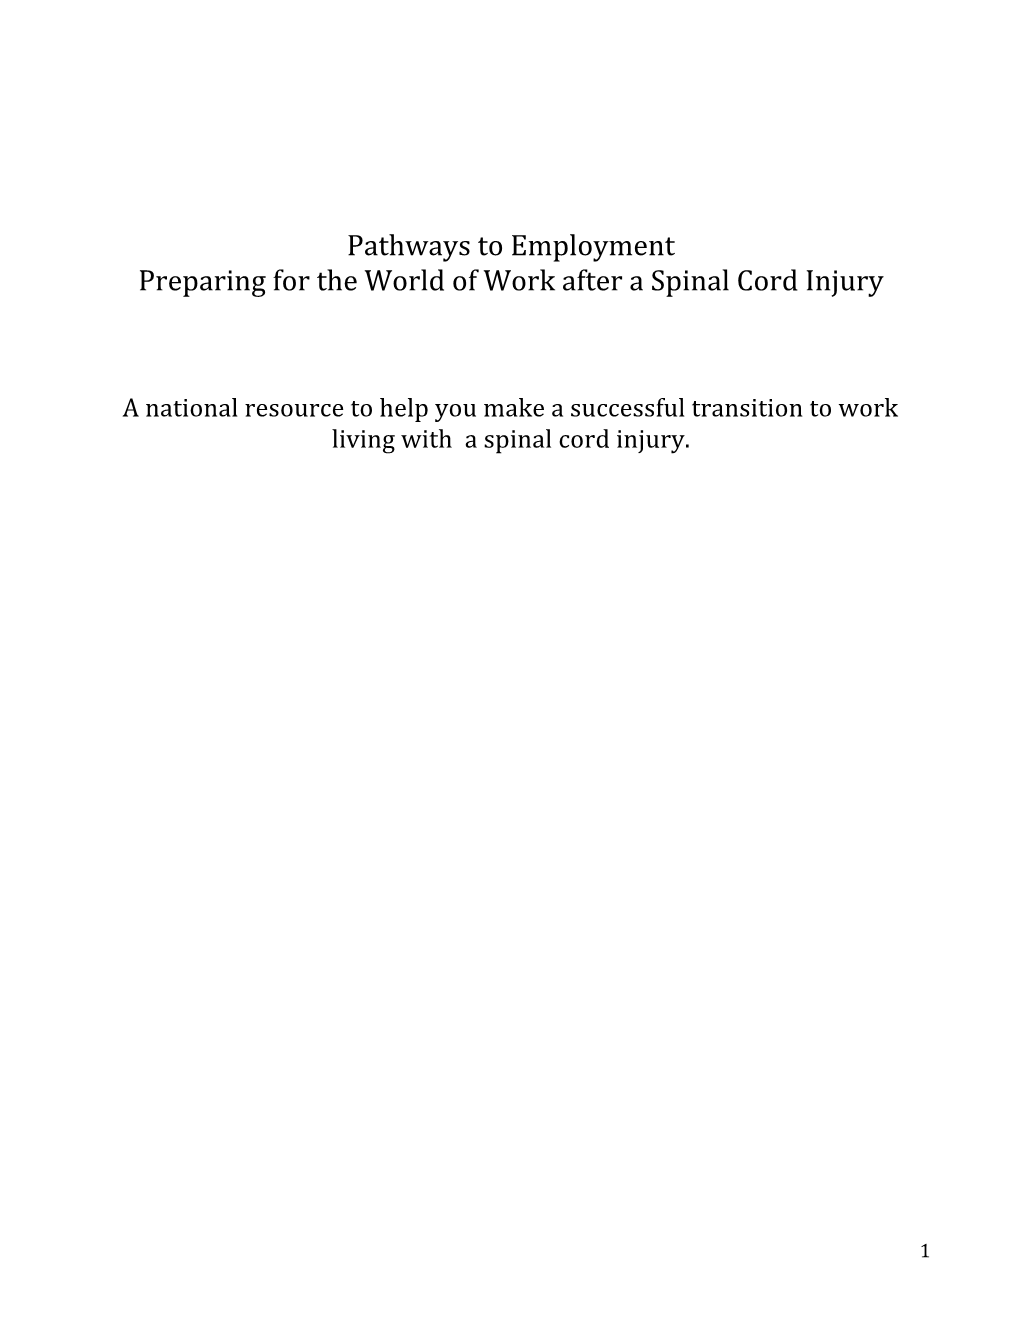 Pathways to Employment Preparing for the World of Work After a Spinal